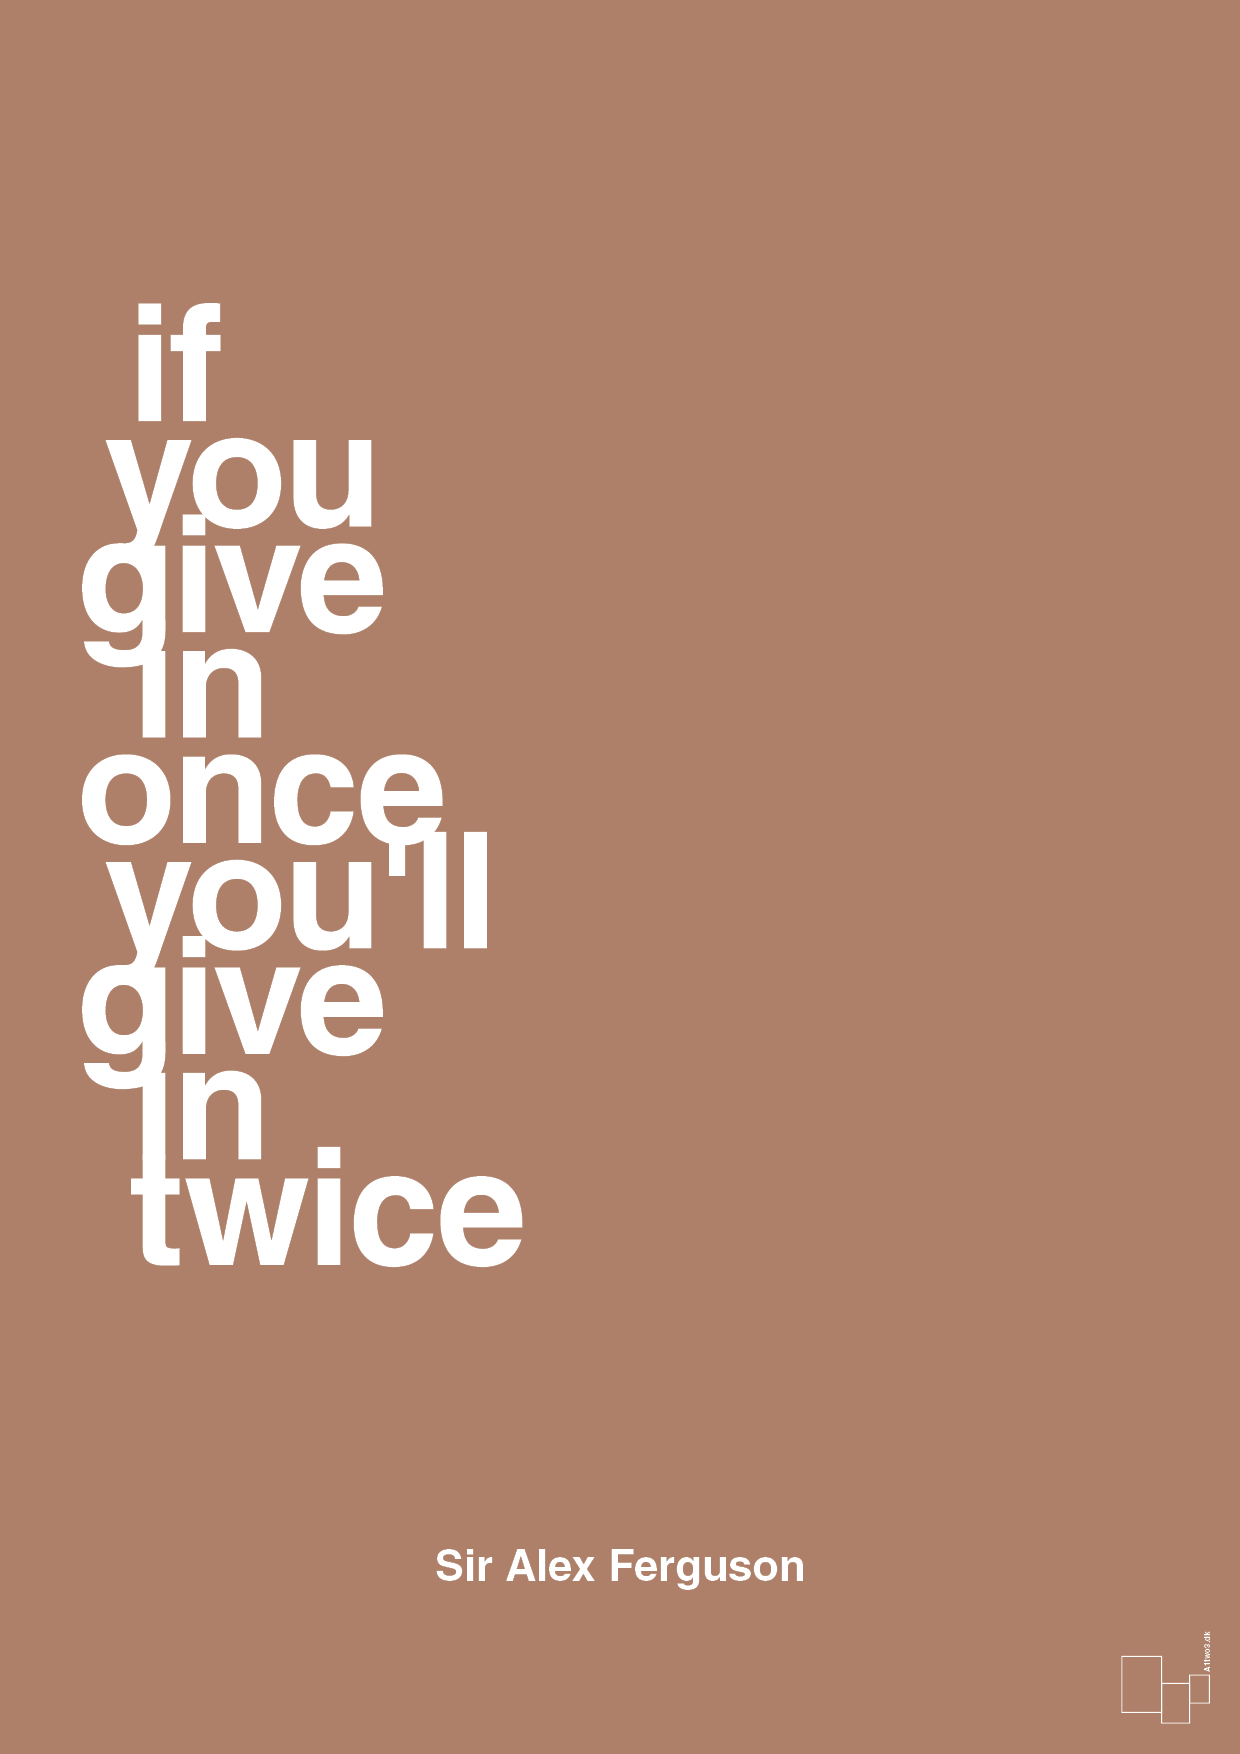 if you give in once you'll give in twice - Plakat med Citater i Cider Spice